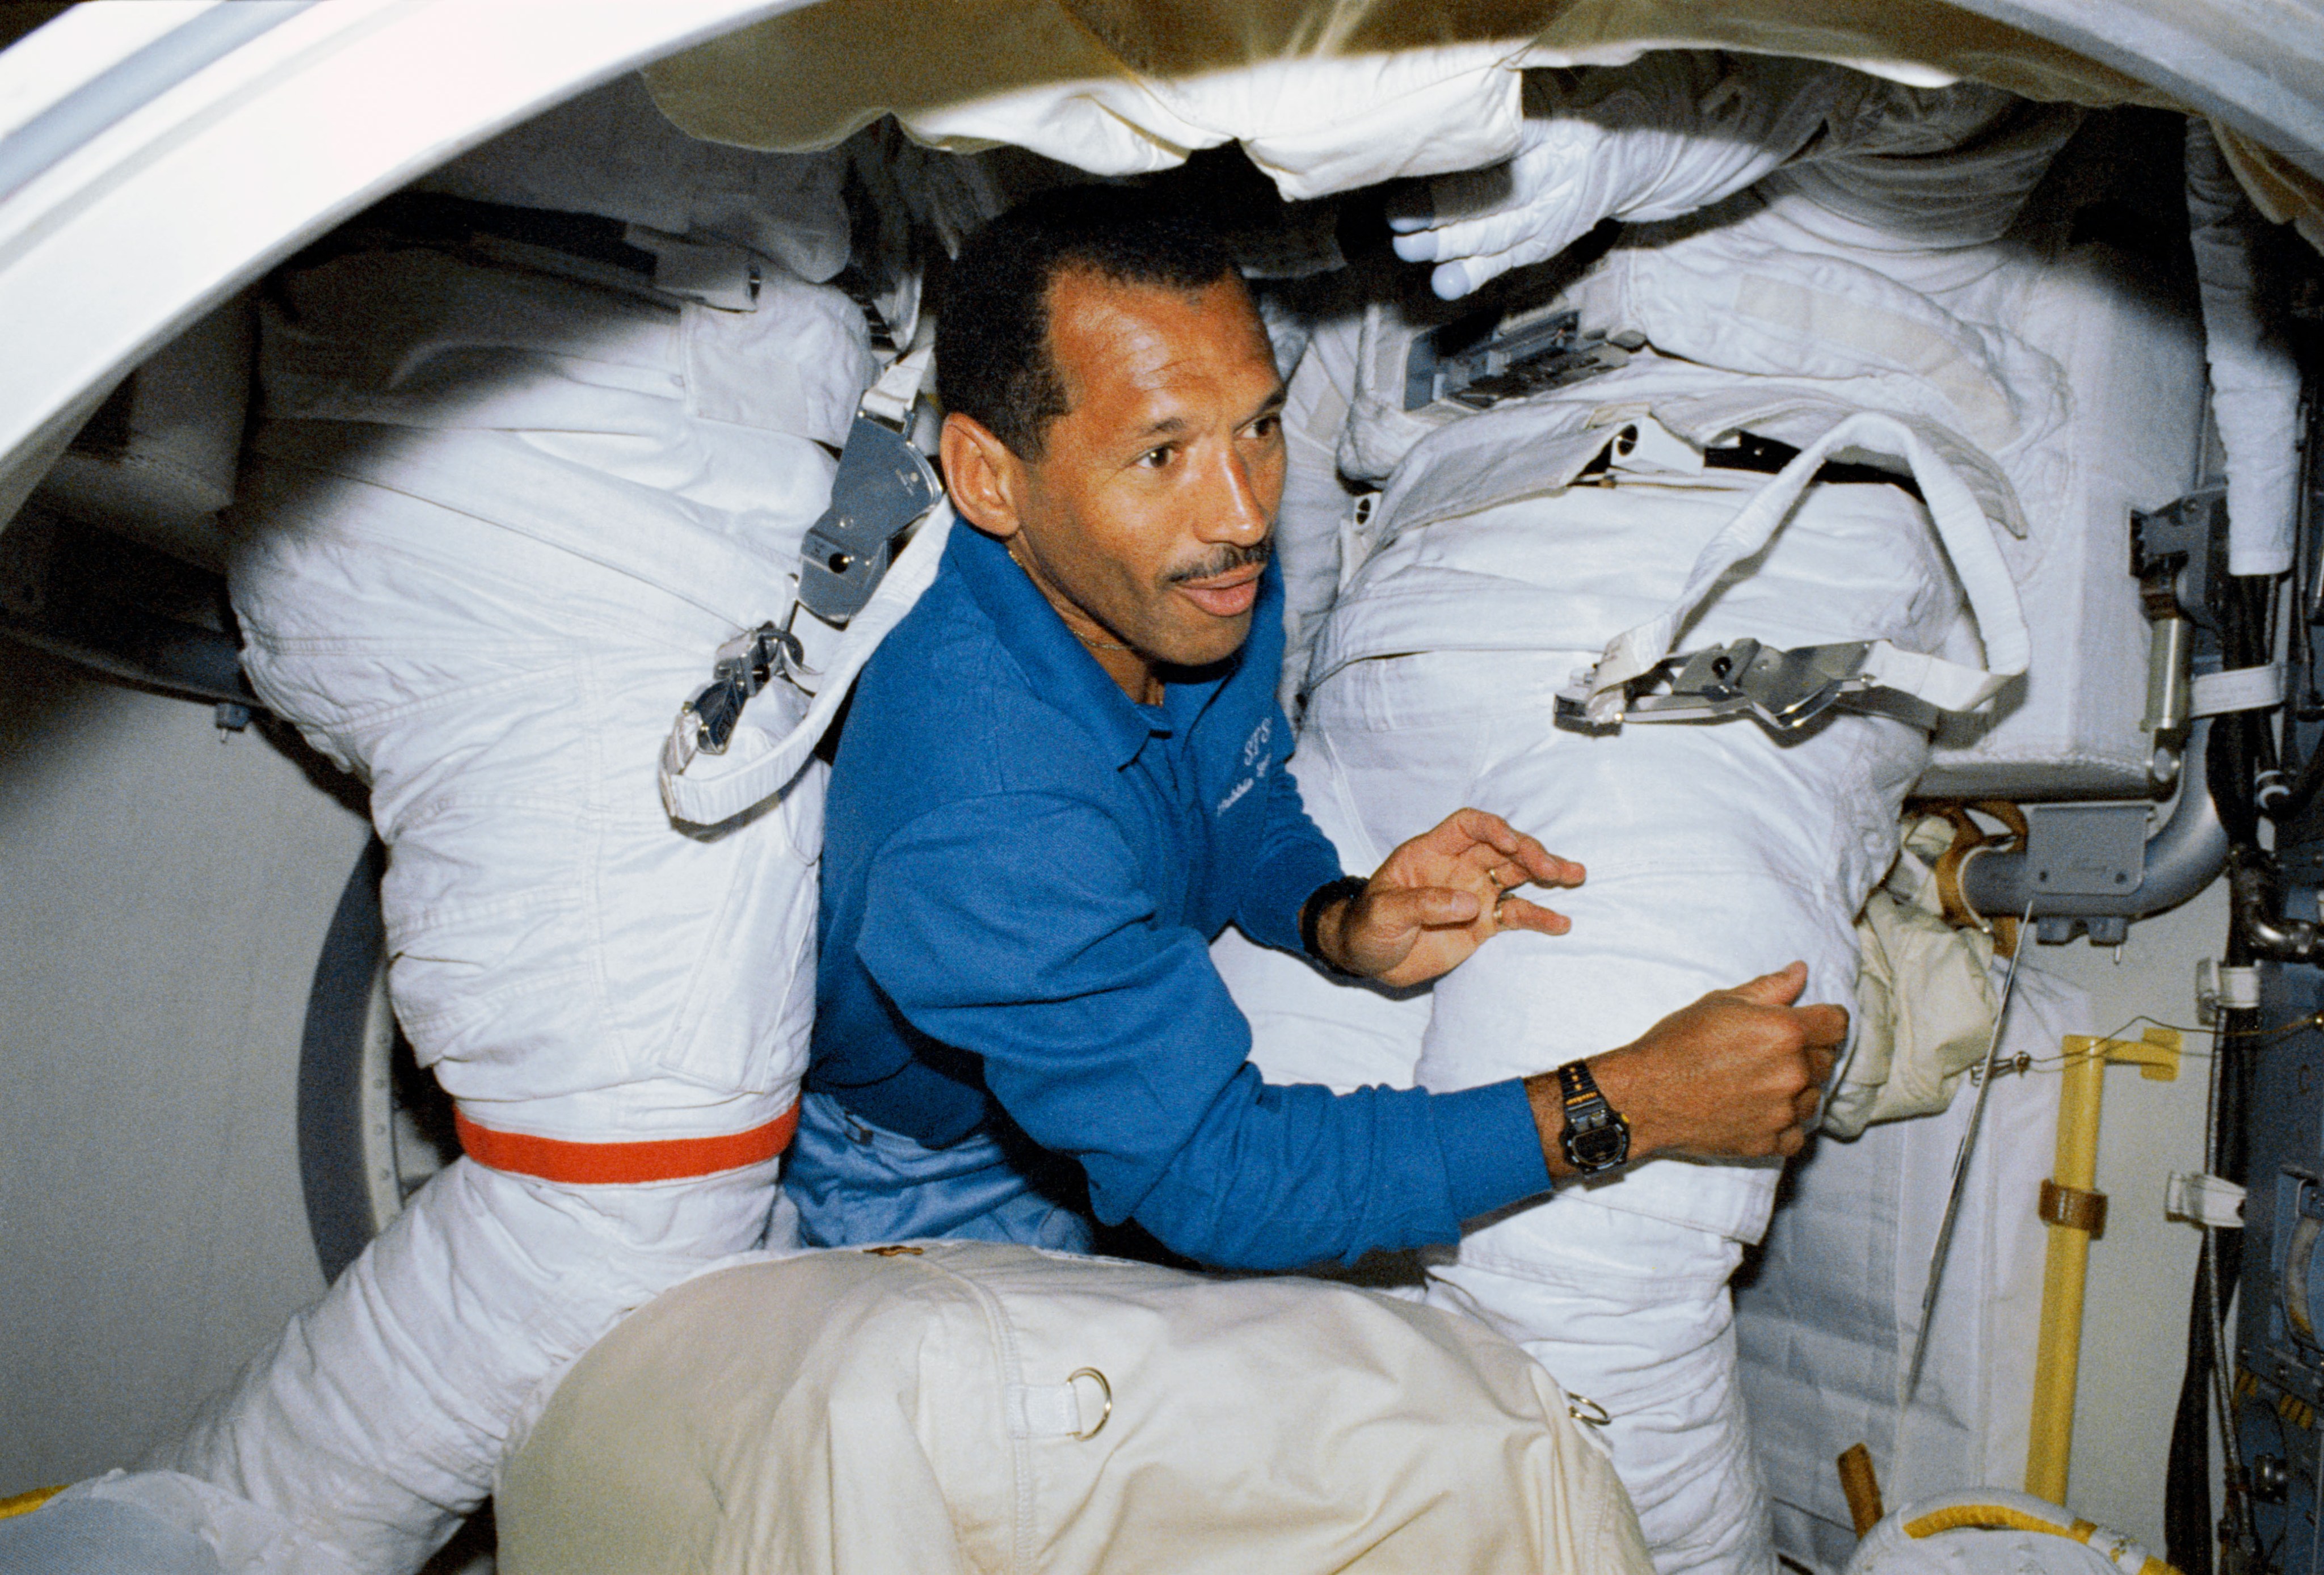 An astronaut surrounded by space suits in the airlock.